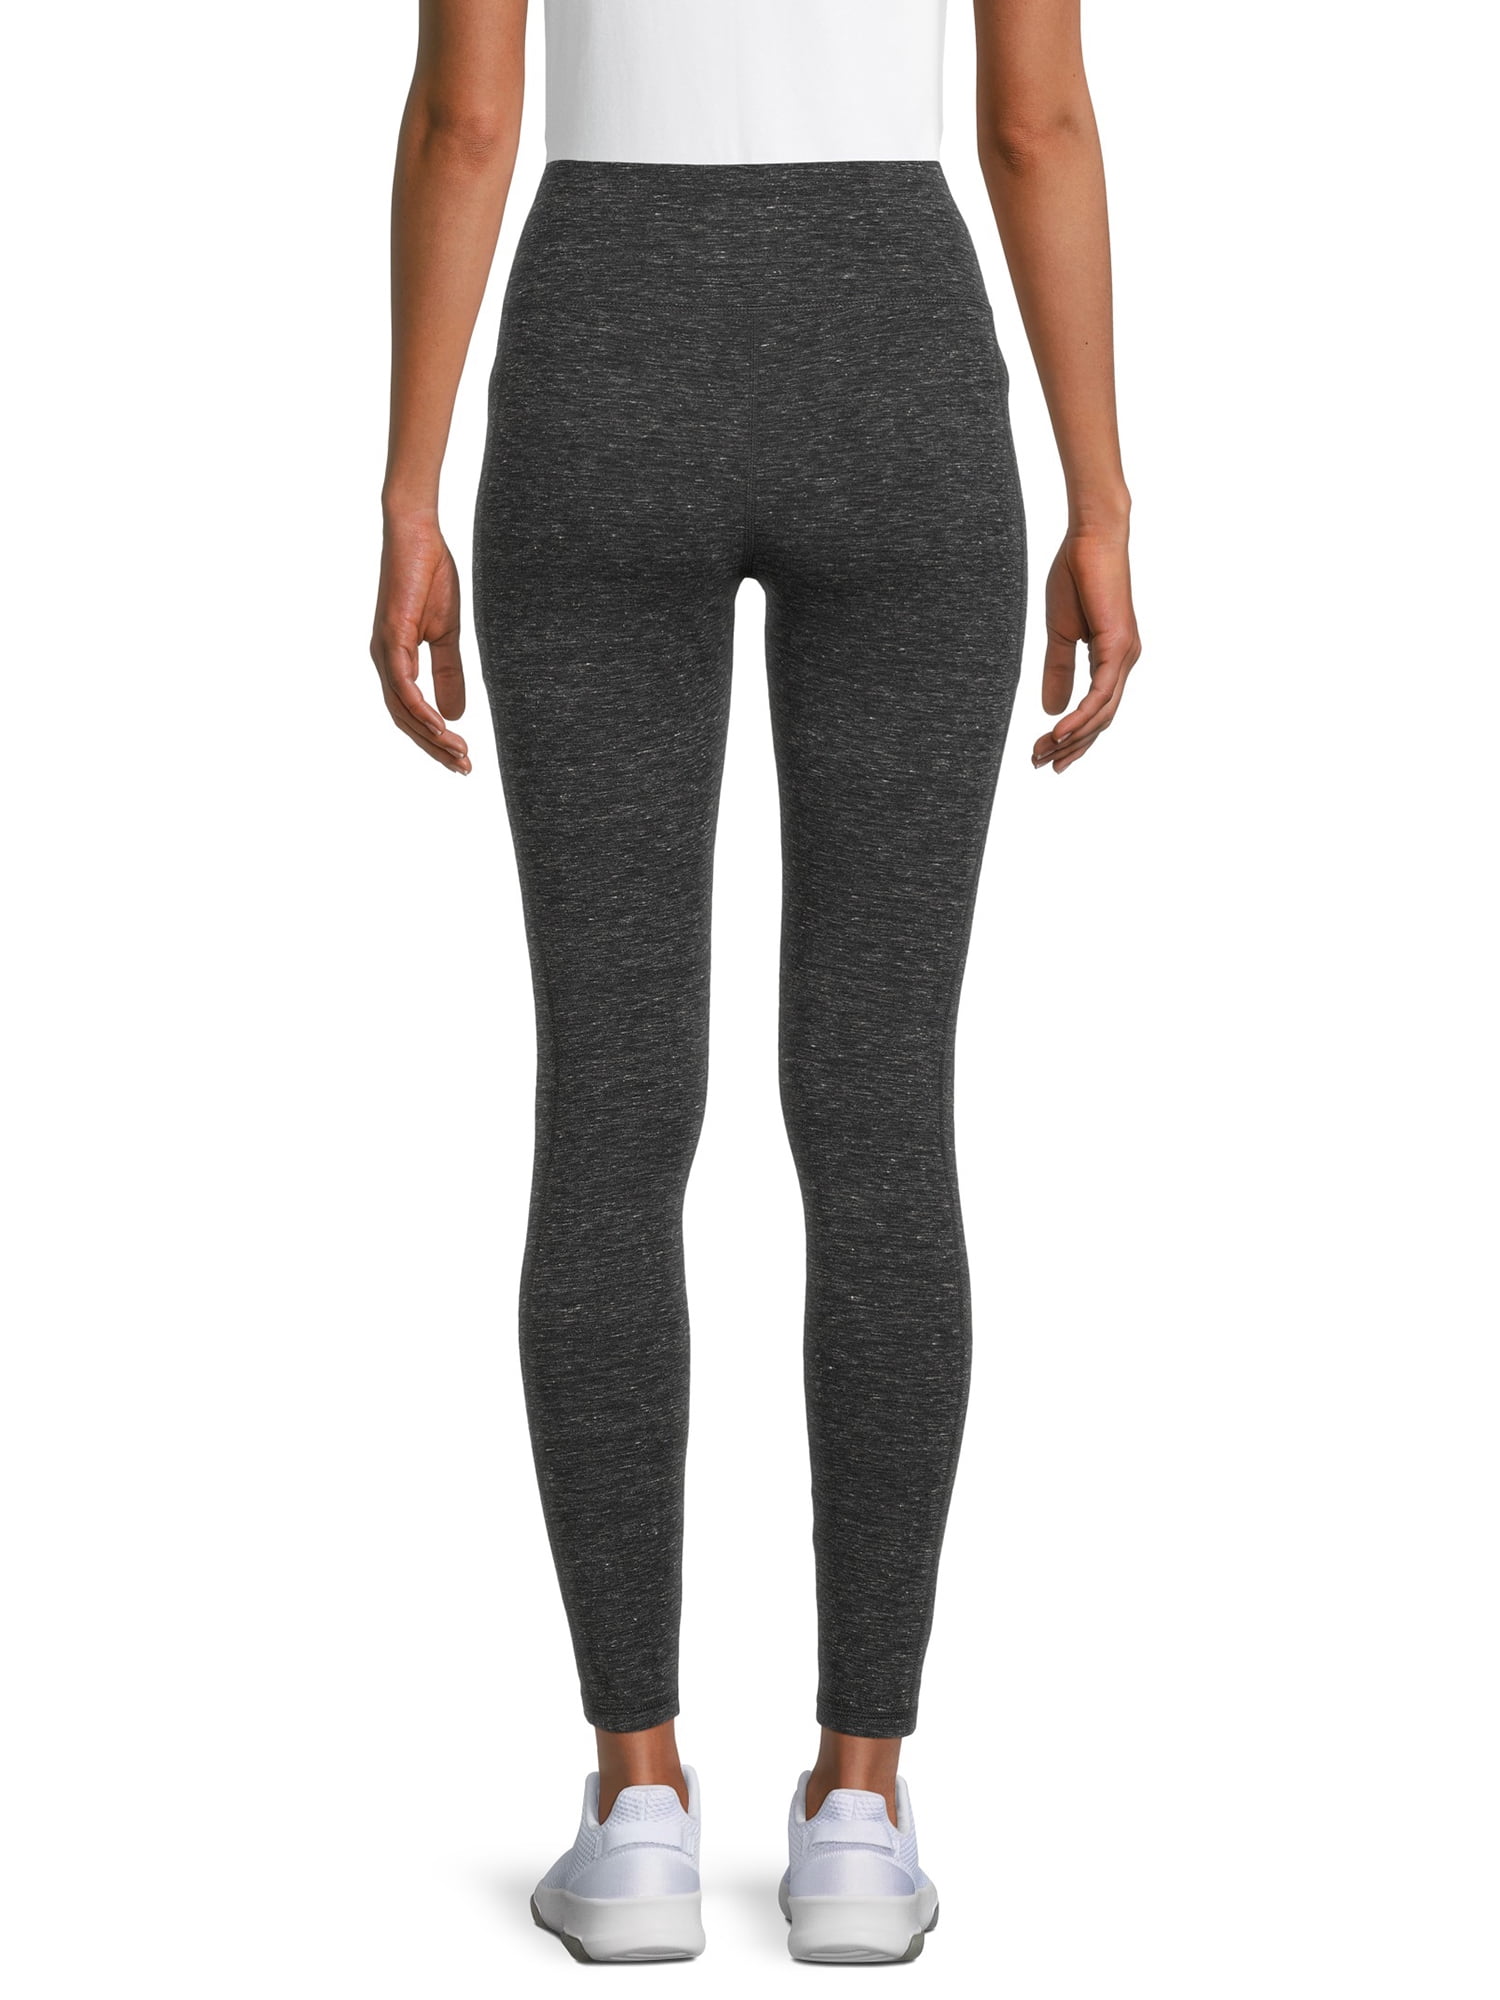 Athletic Works Women's and Women's Plus Stretch Cotton Blend